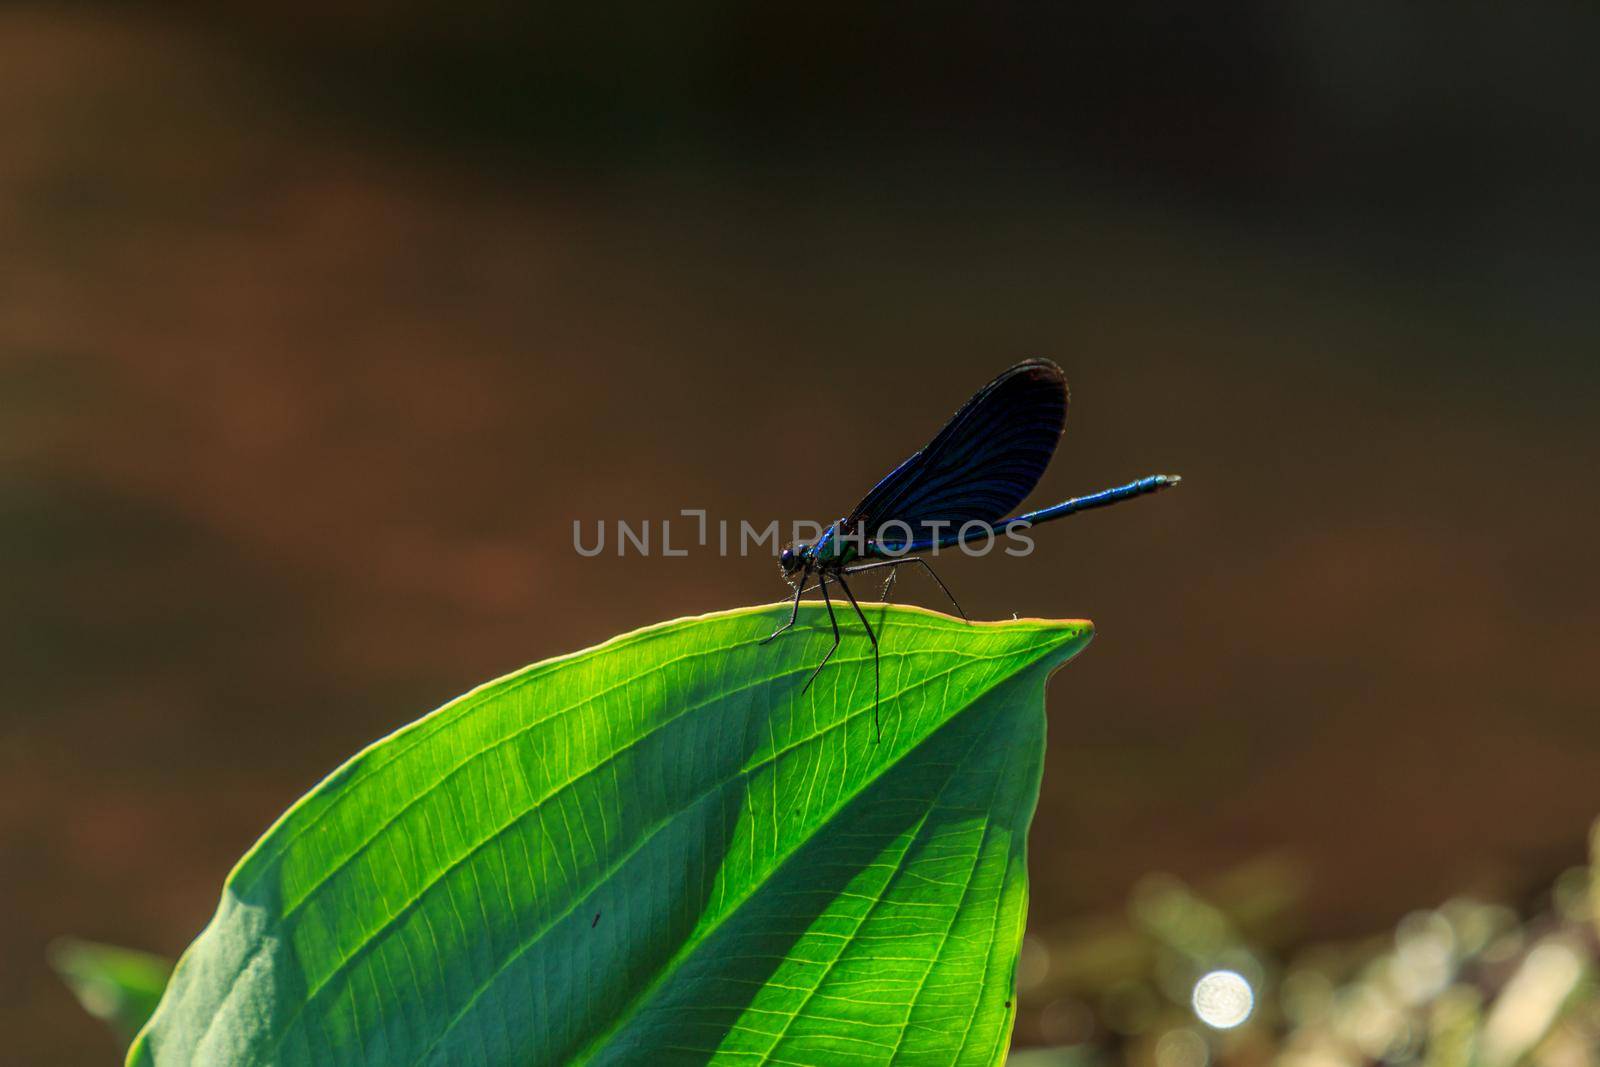 Blue dragonfly insect on grass by scudrinja